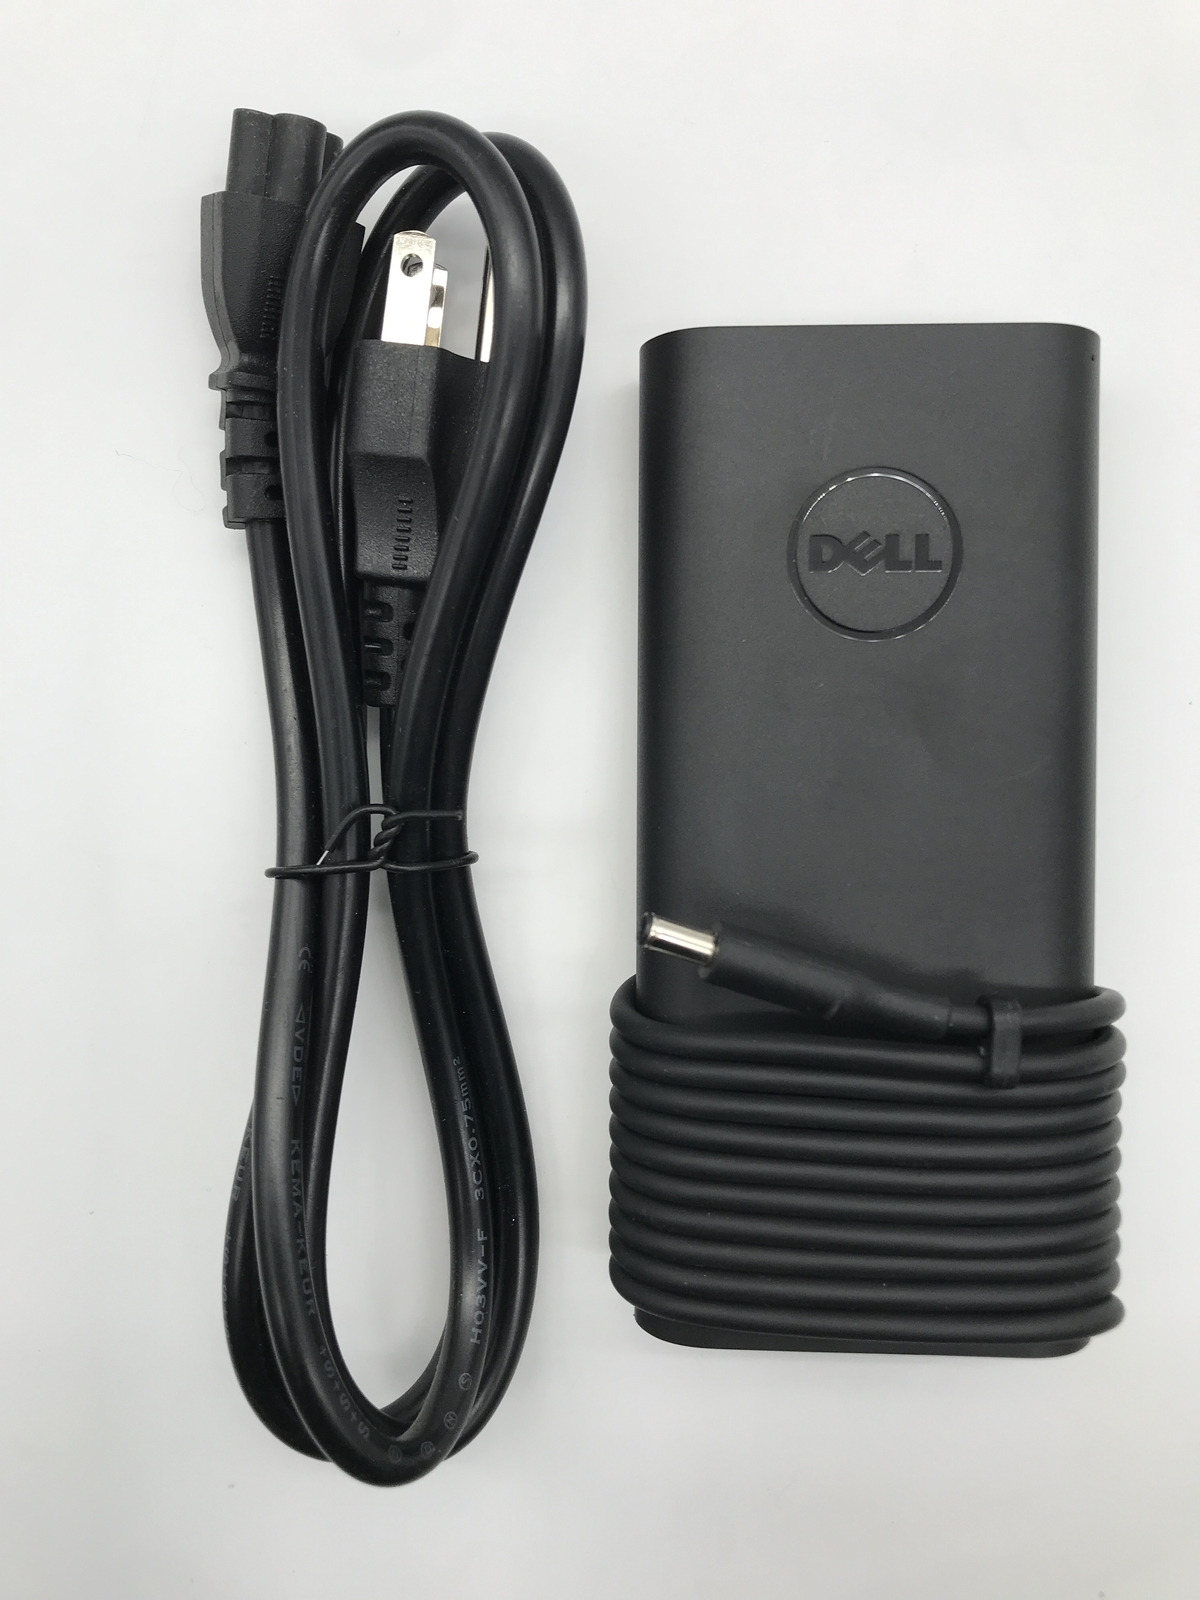 OEM DELL 130W AC ADAPTER 19.5V 4.5MM SMALL TIP For Dell XPS Precision 0V363H